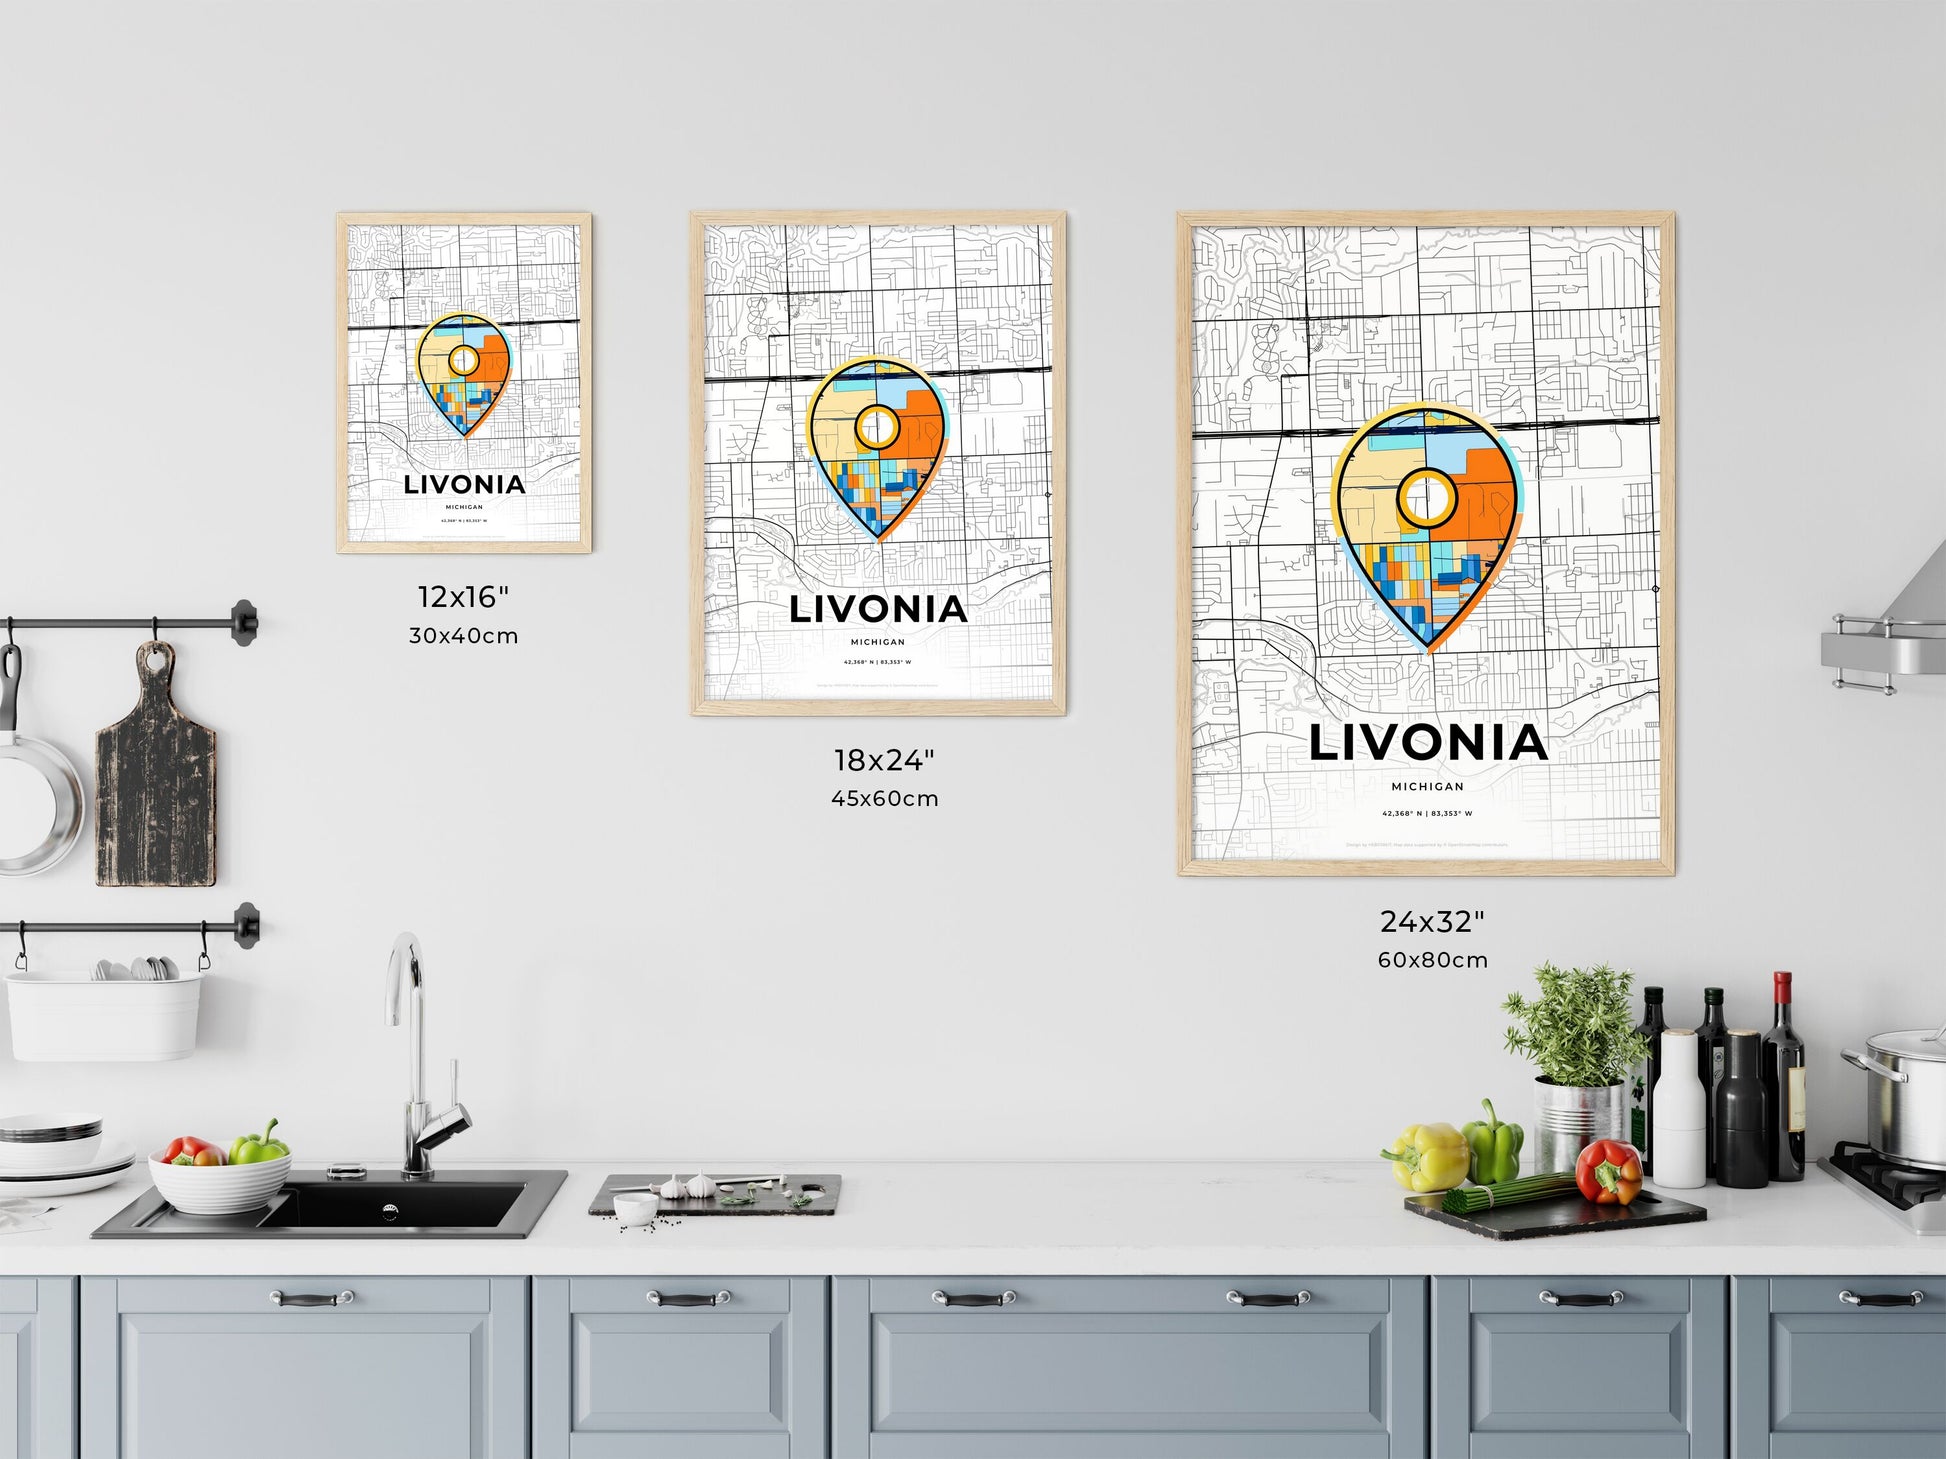 LIVONIA MICHIGAN minimal art map with a colorful icon. Where it all began, Couple map gift.